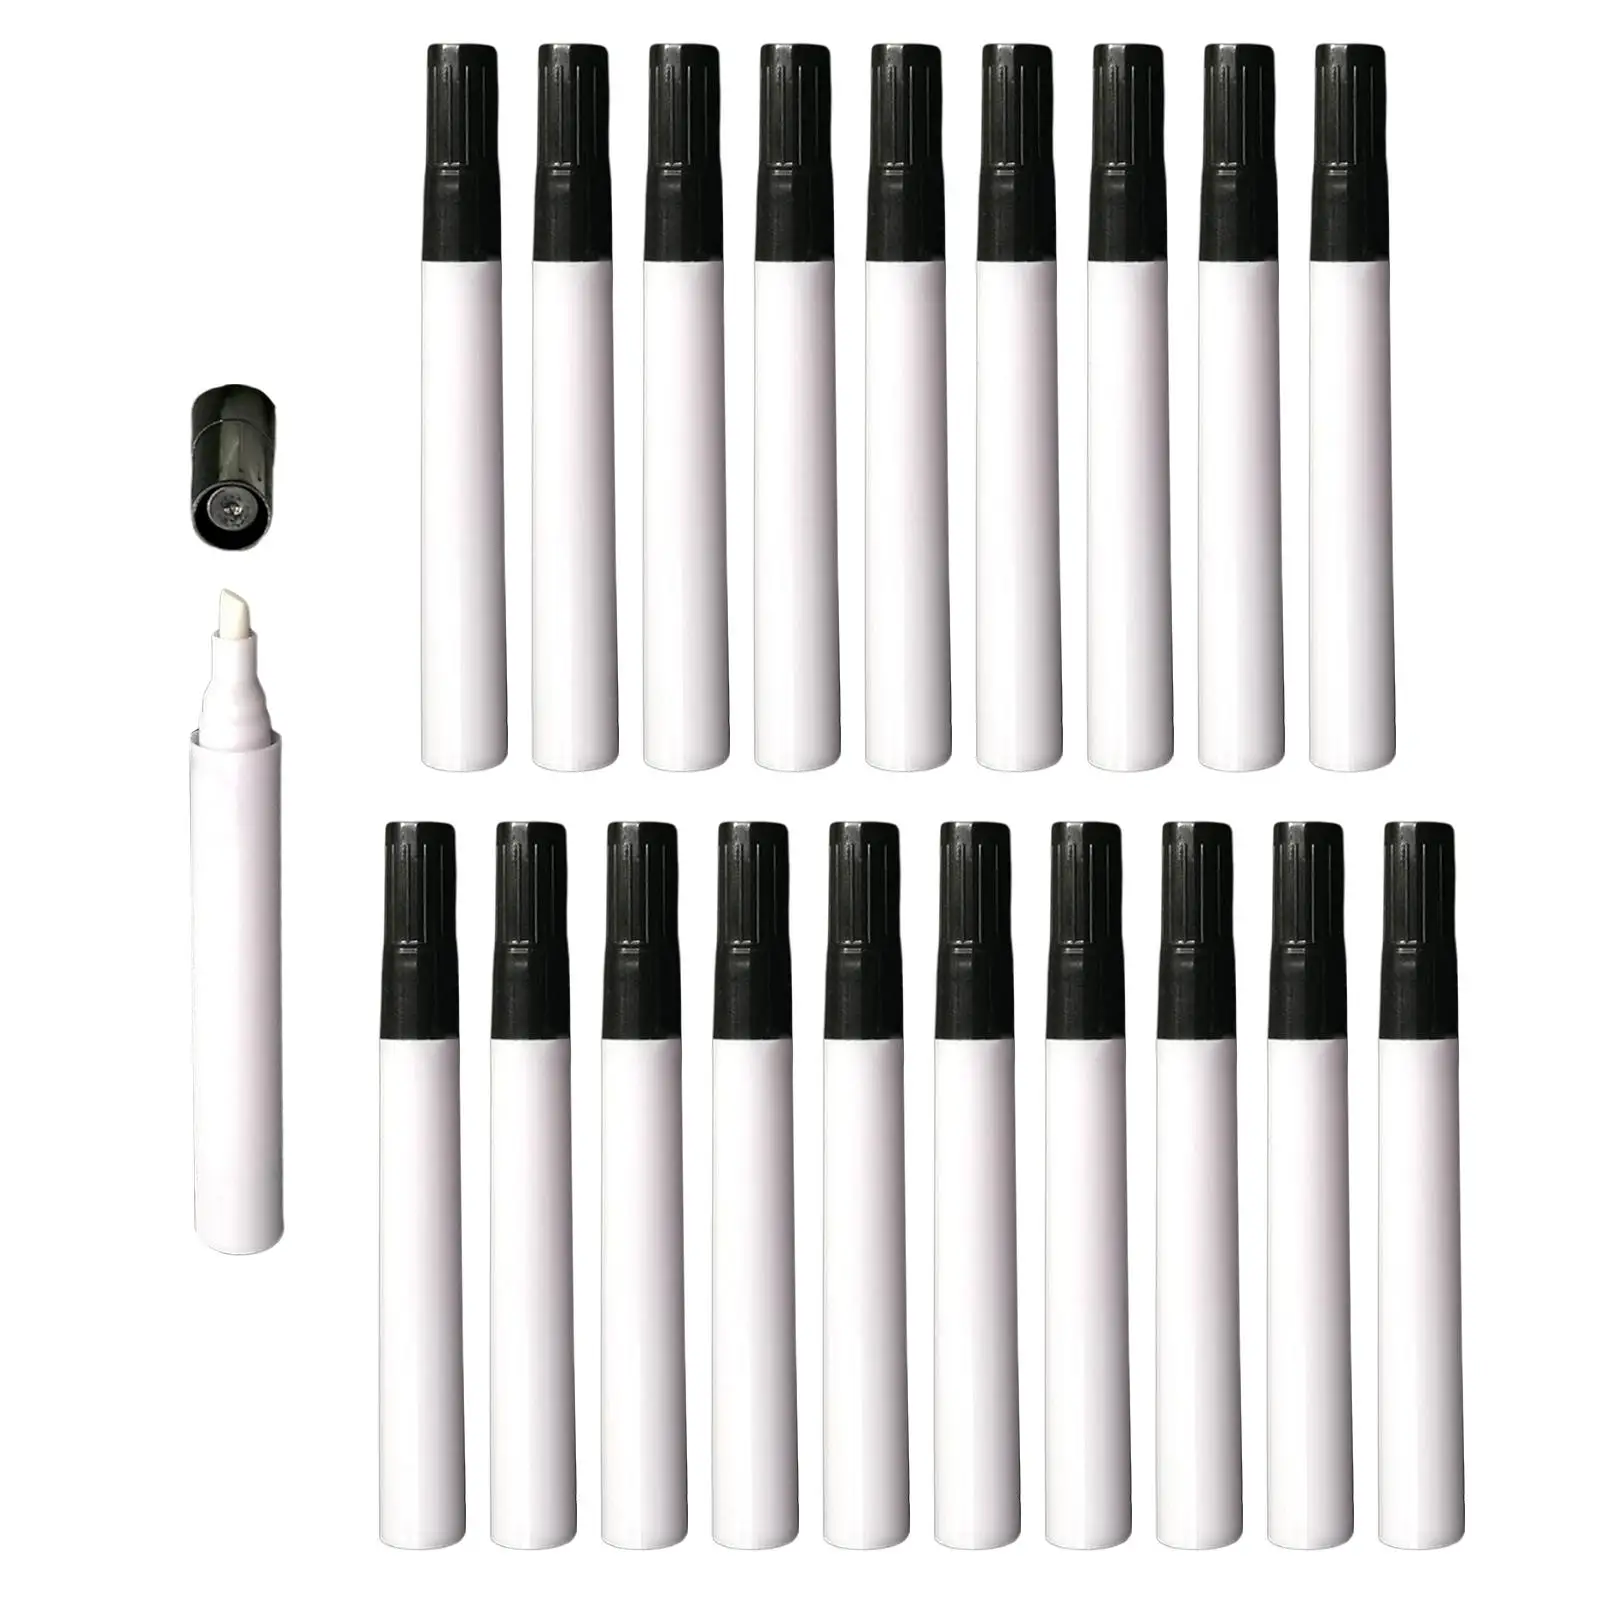 10x Empty Fillable Blank Paint  Pen Markers Fill with Your Own Art ,Pen Rod Barrels Tube Auto Painting  for Art, Painting